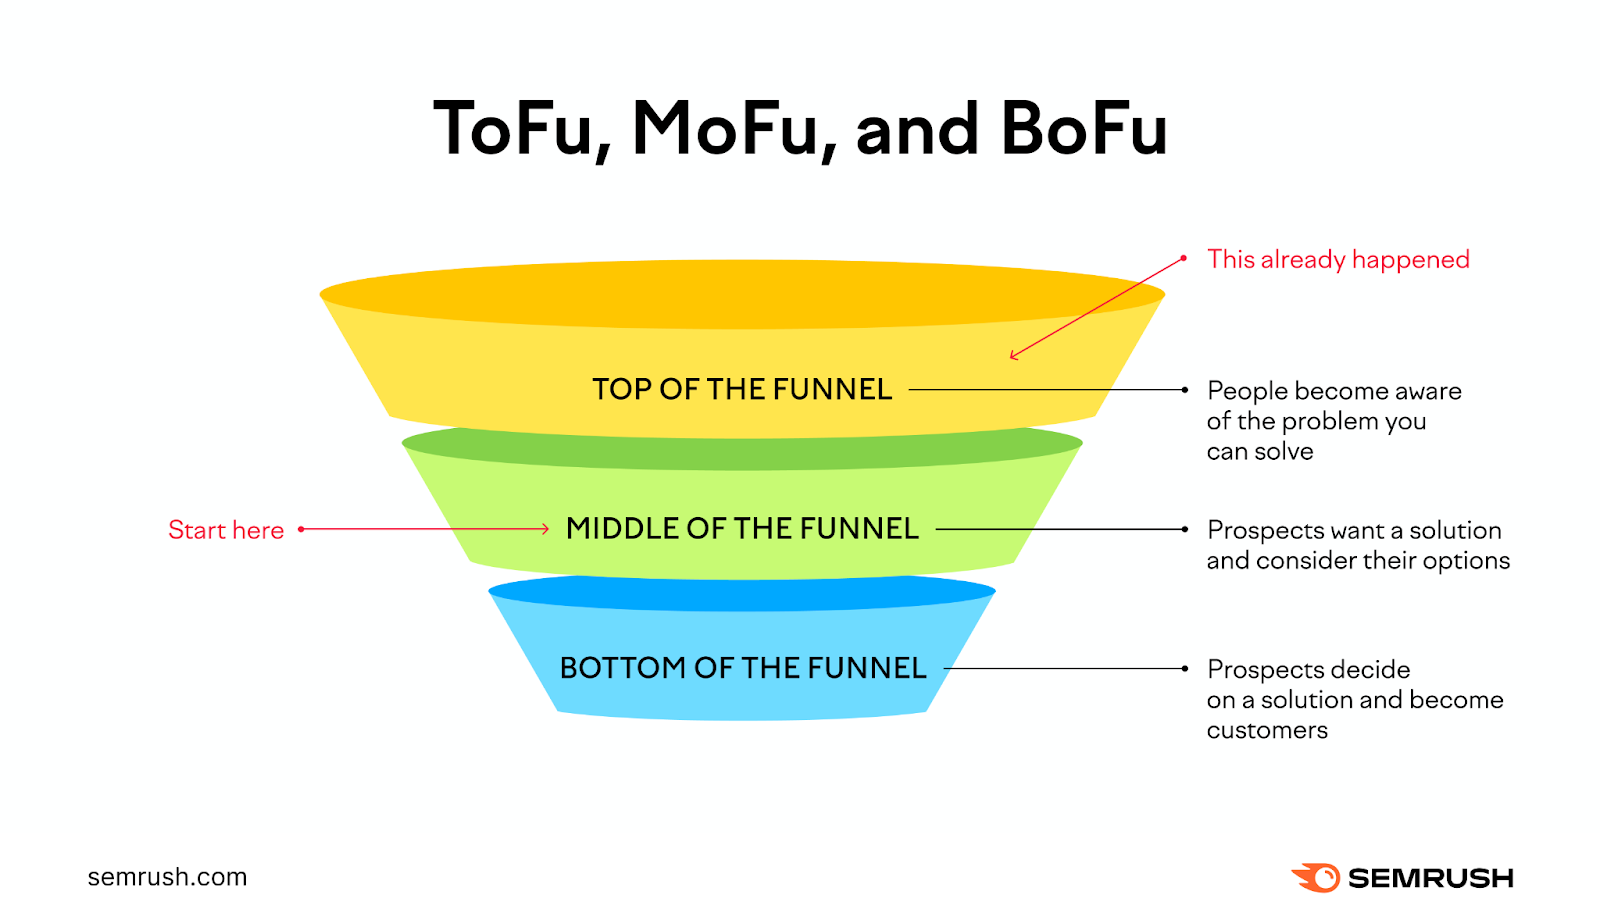 An illustration of the marketing funnel